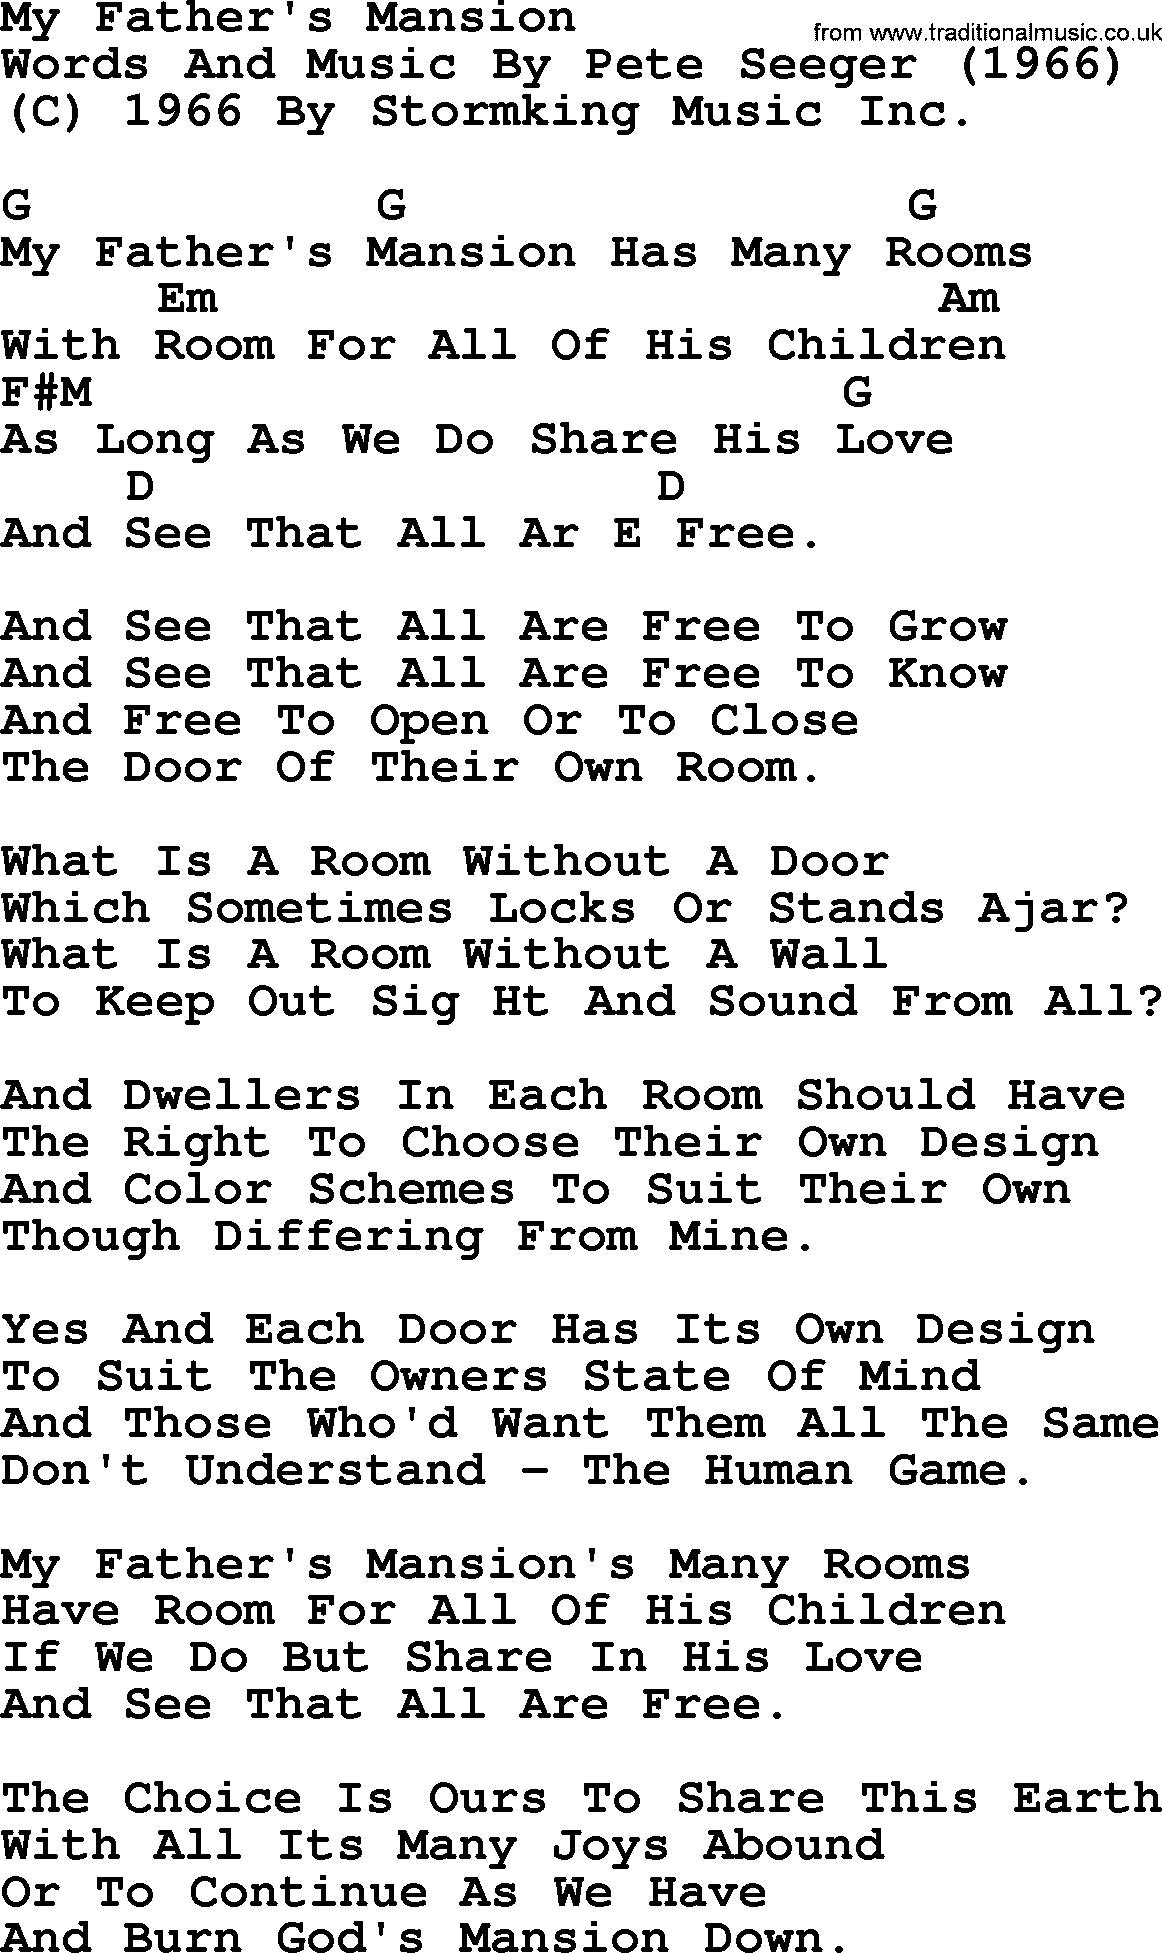 Pete Seeger song My Fathers Mansions, lyrics and chords